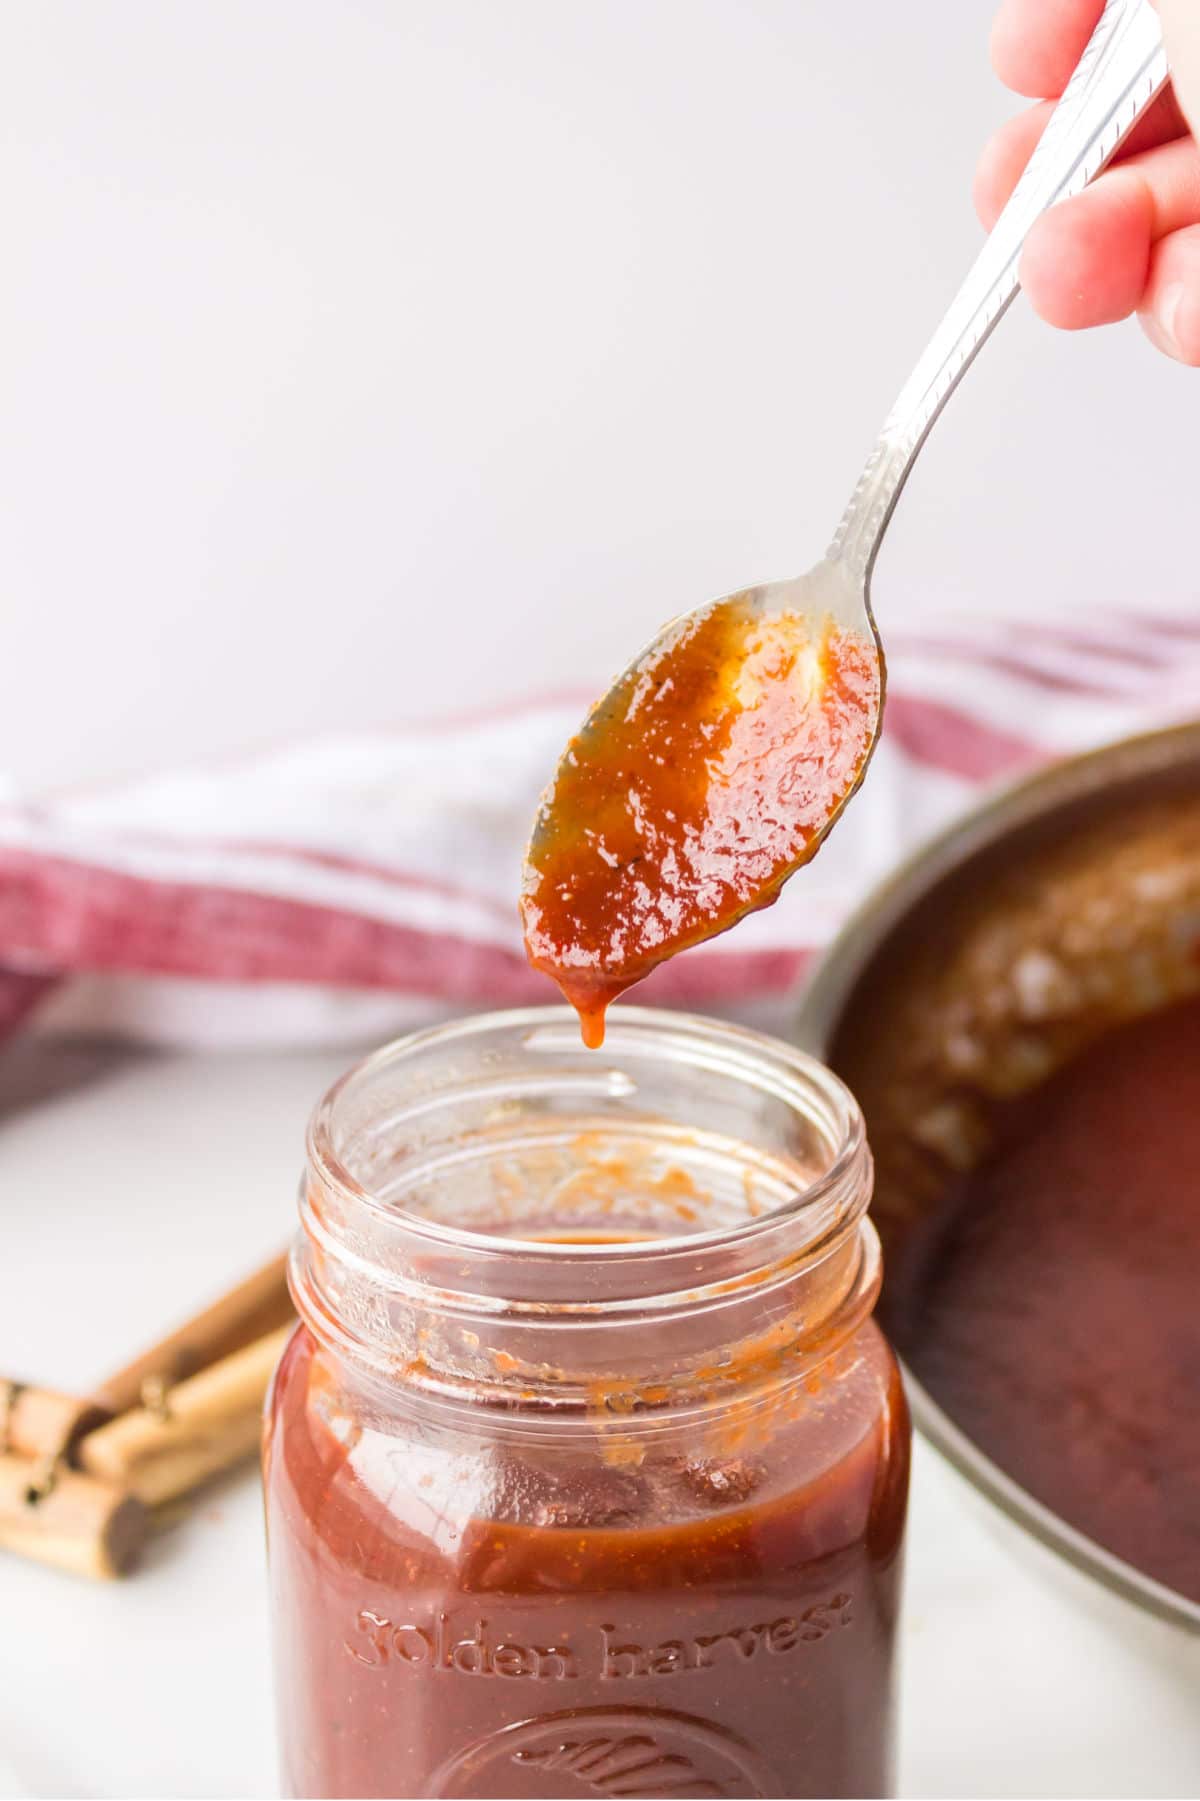 Dr Pepper barbecue sauce pouring off a spoon into a jar.